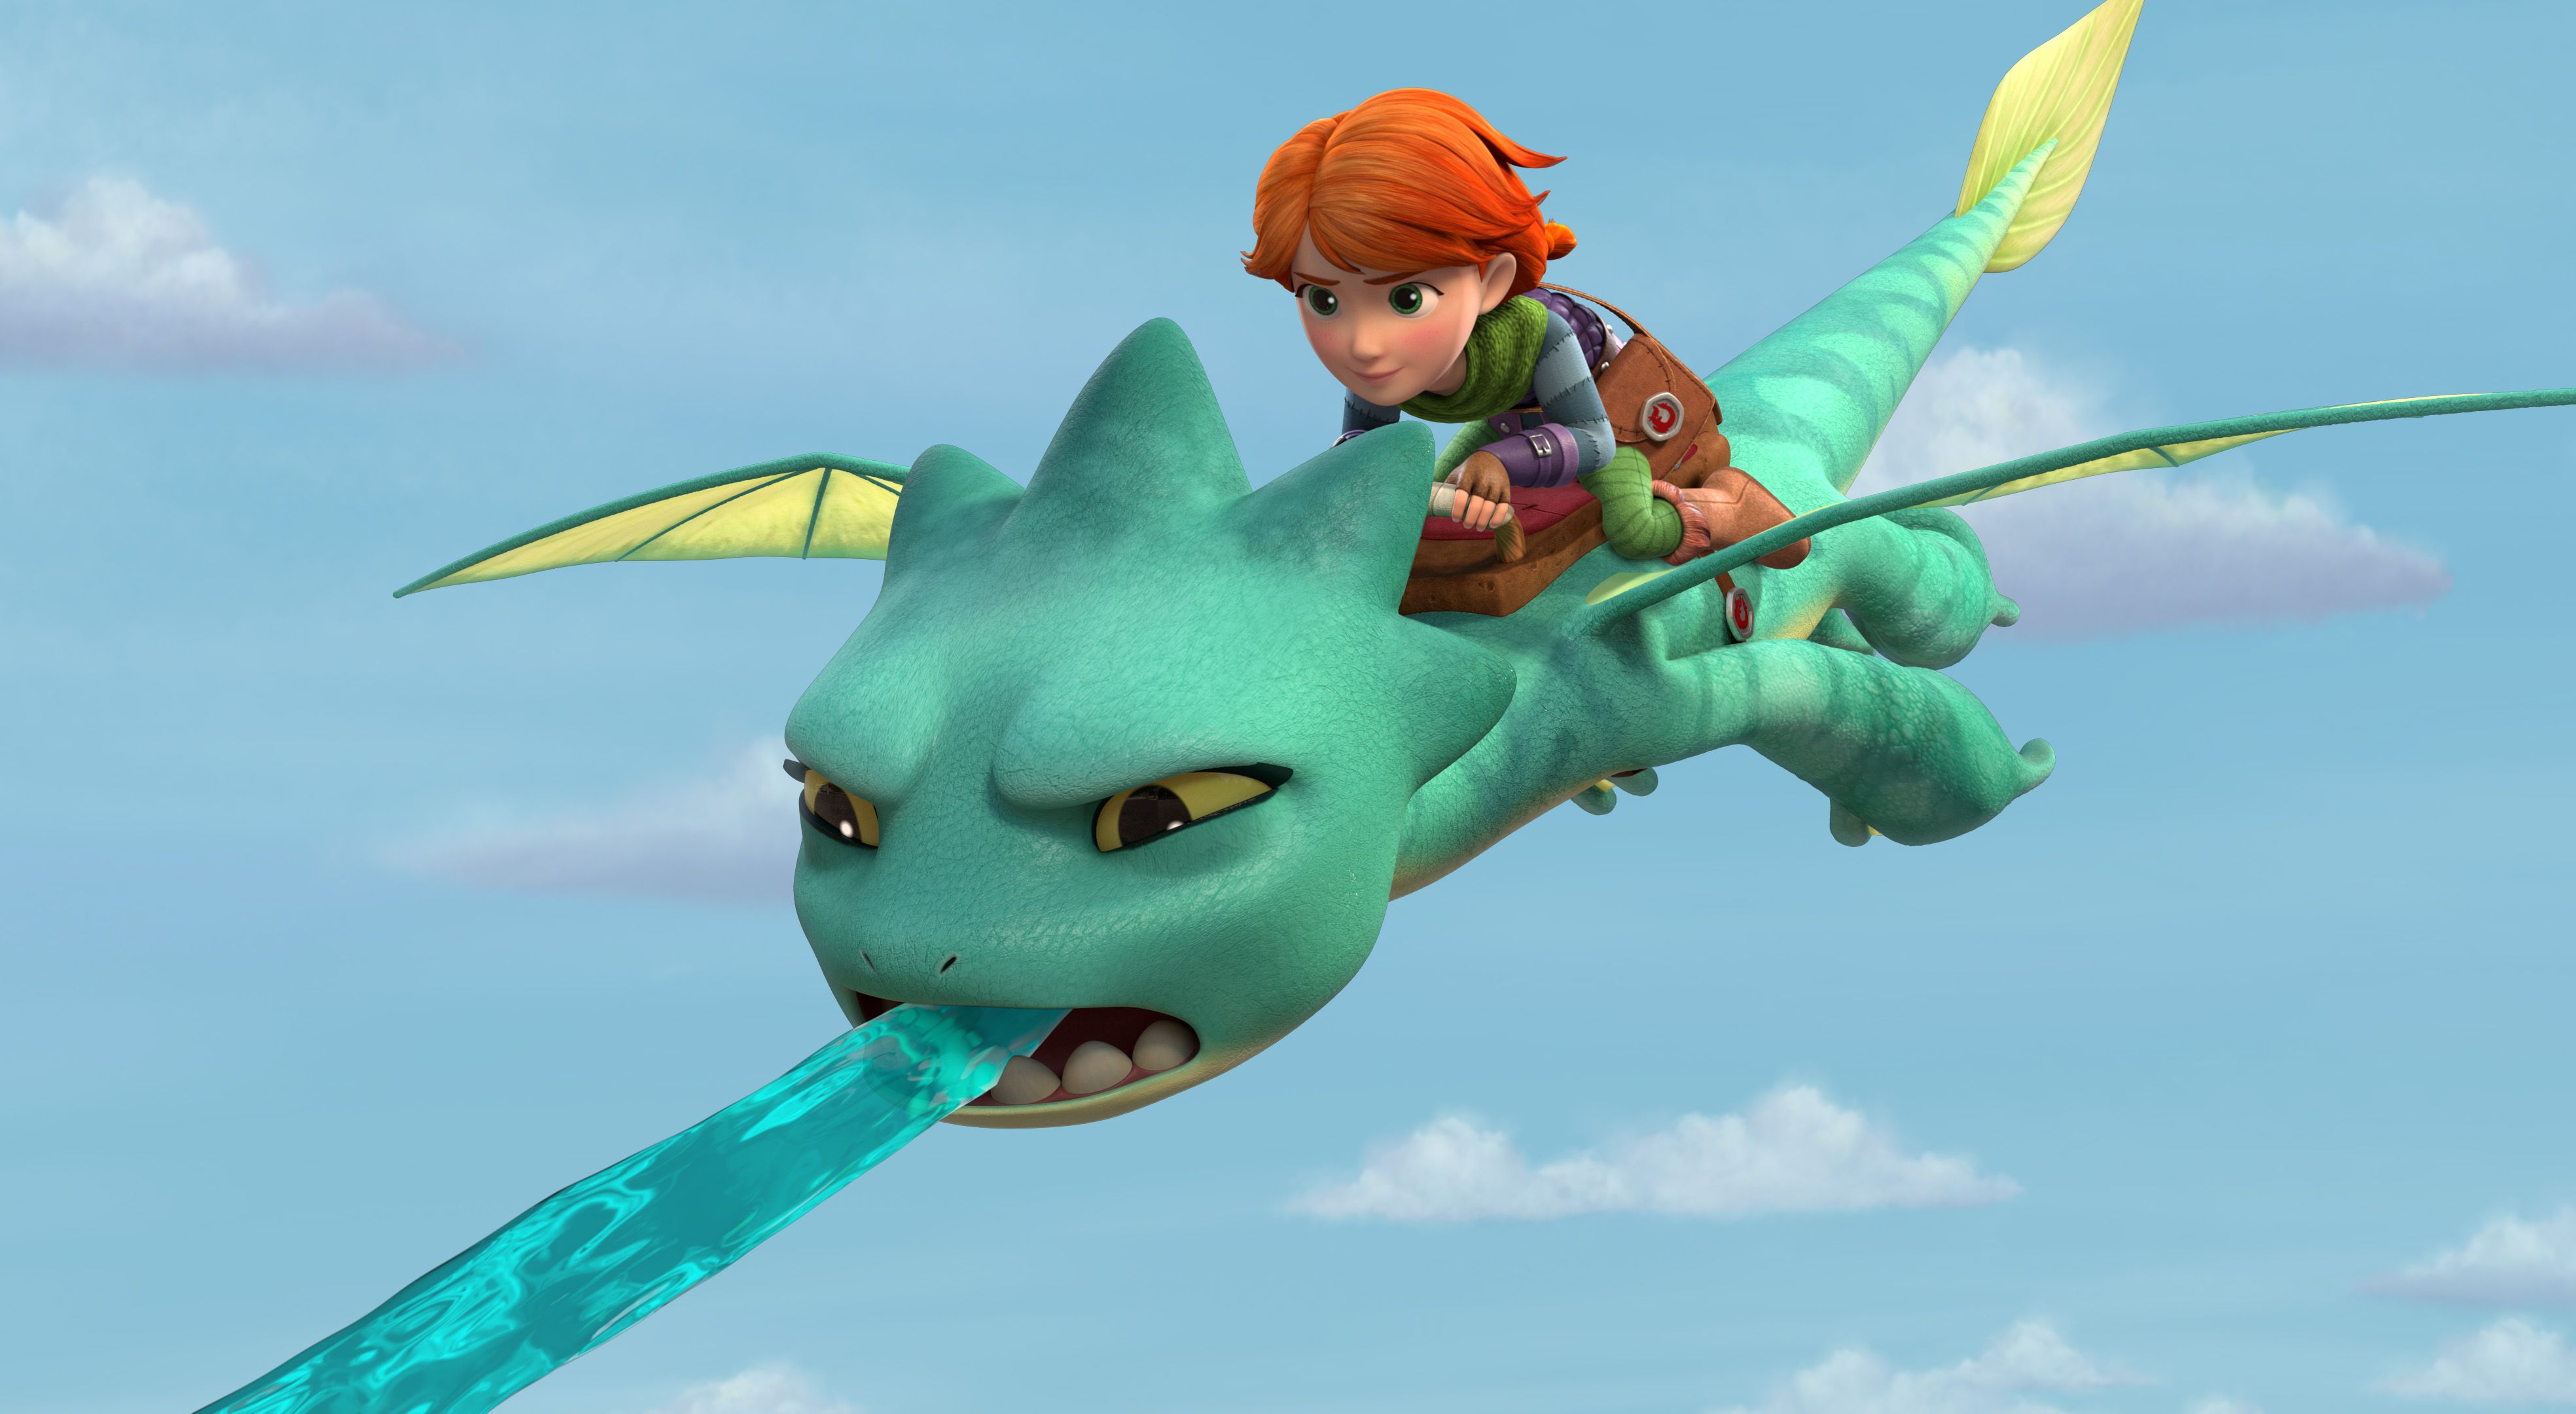 Dragons Rescue Riders Trailer, Image for DreamWorks' New Netflix